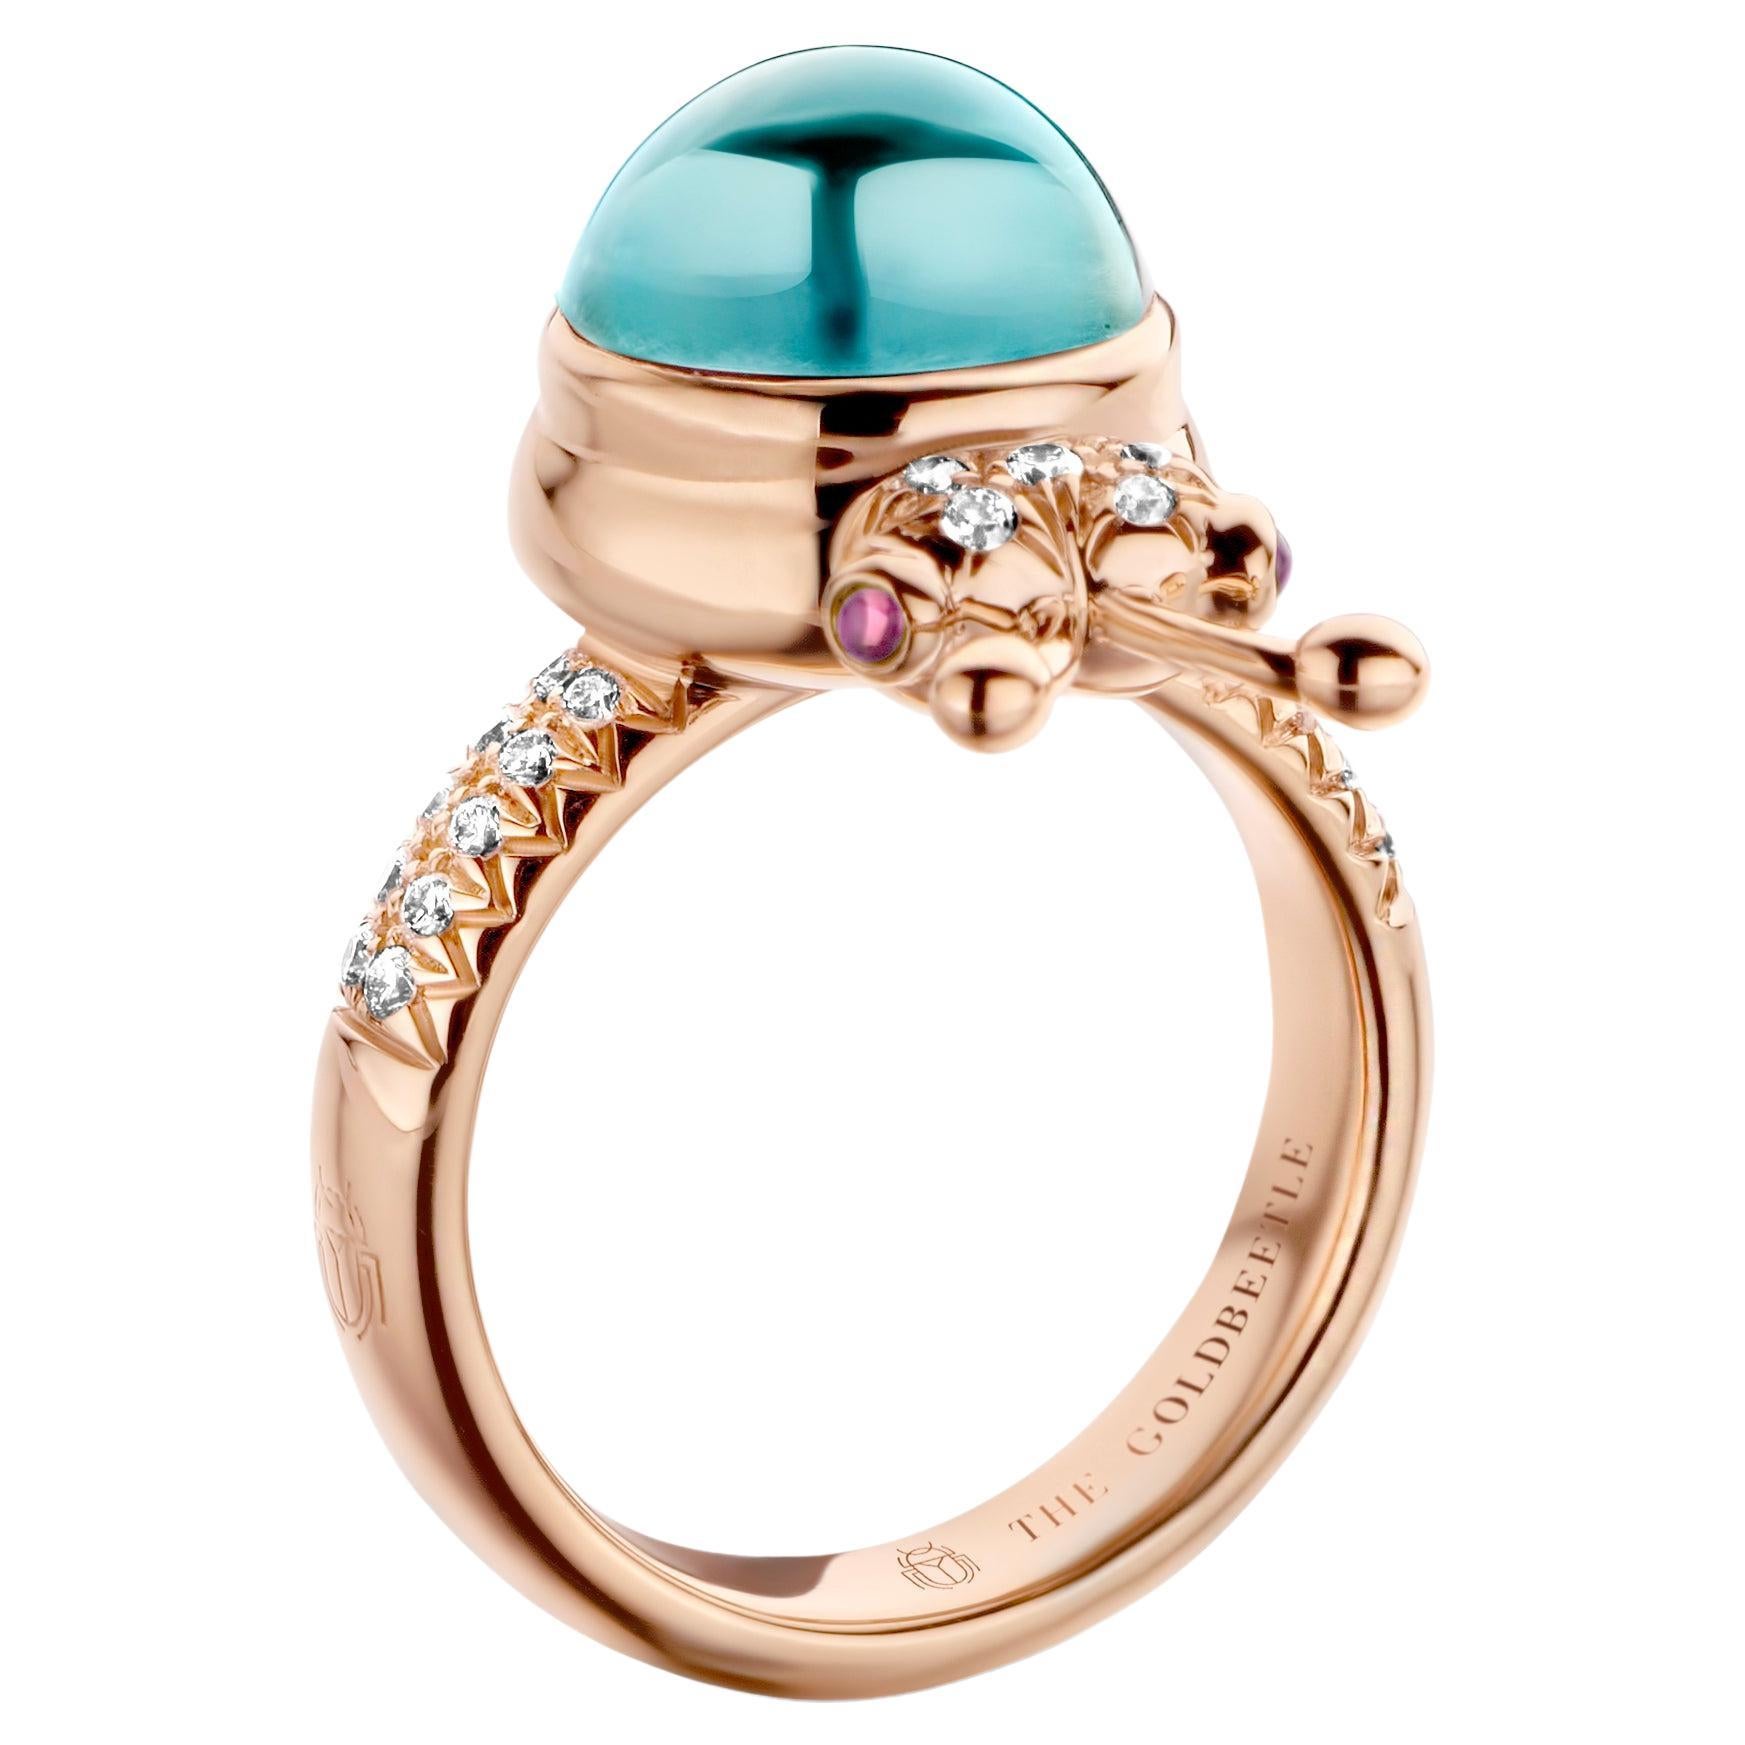 One-of-a-kind lucky beetle ring in 18 Karat rose gold 10g set with the finest natural diamonds in brilliant cut 0,23 Carat (VVS/DEF quality) one natural, Aquamarine in round cabochon cut 6,00 Carat and two pink tourmalines in round cabochon cut.